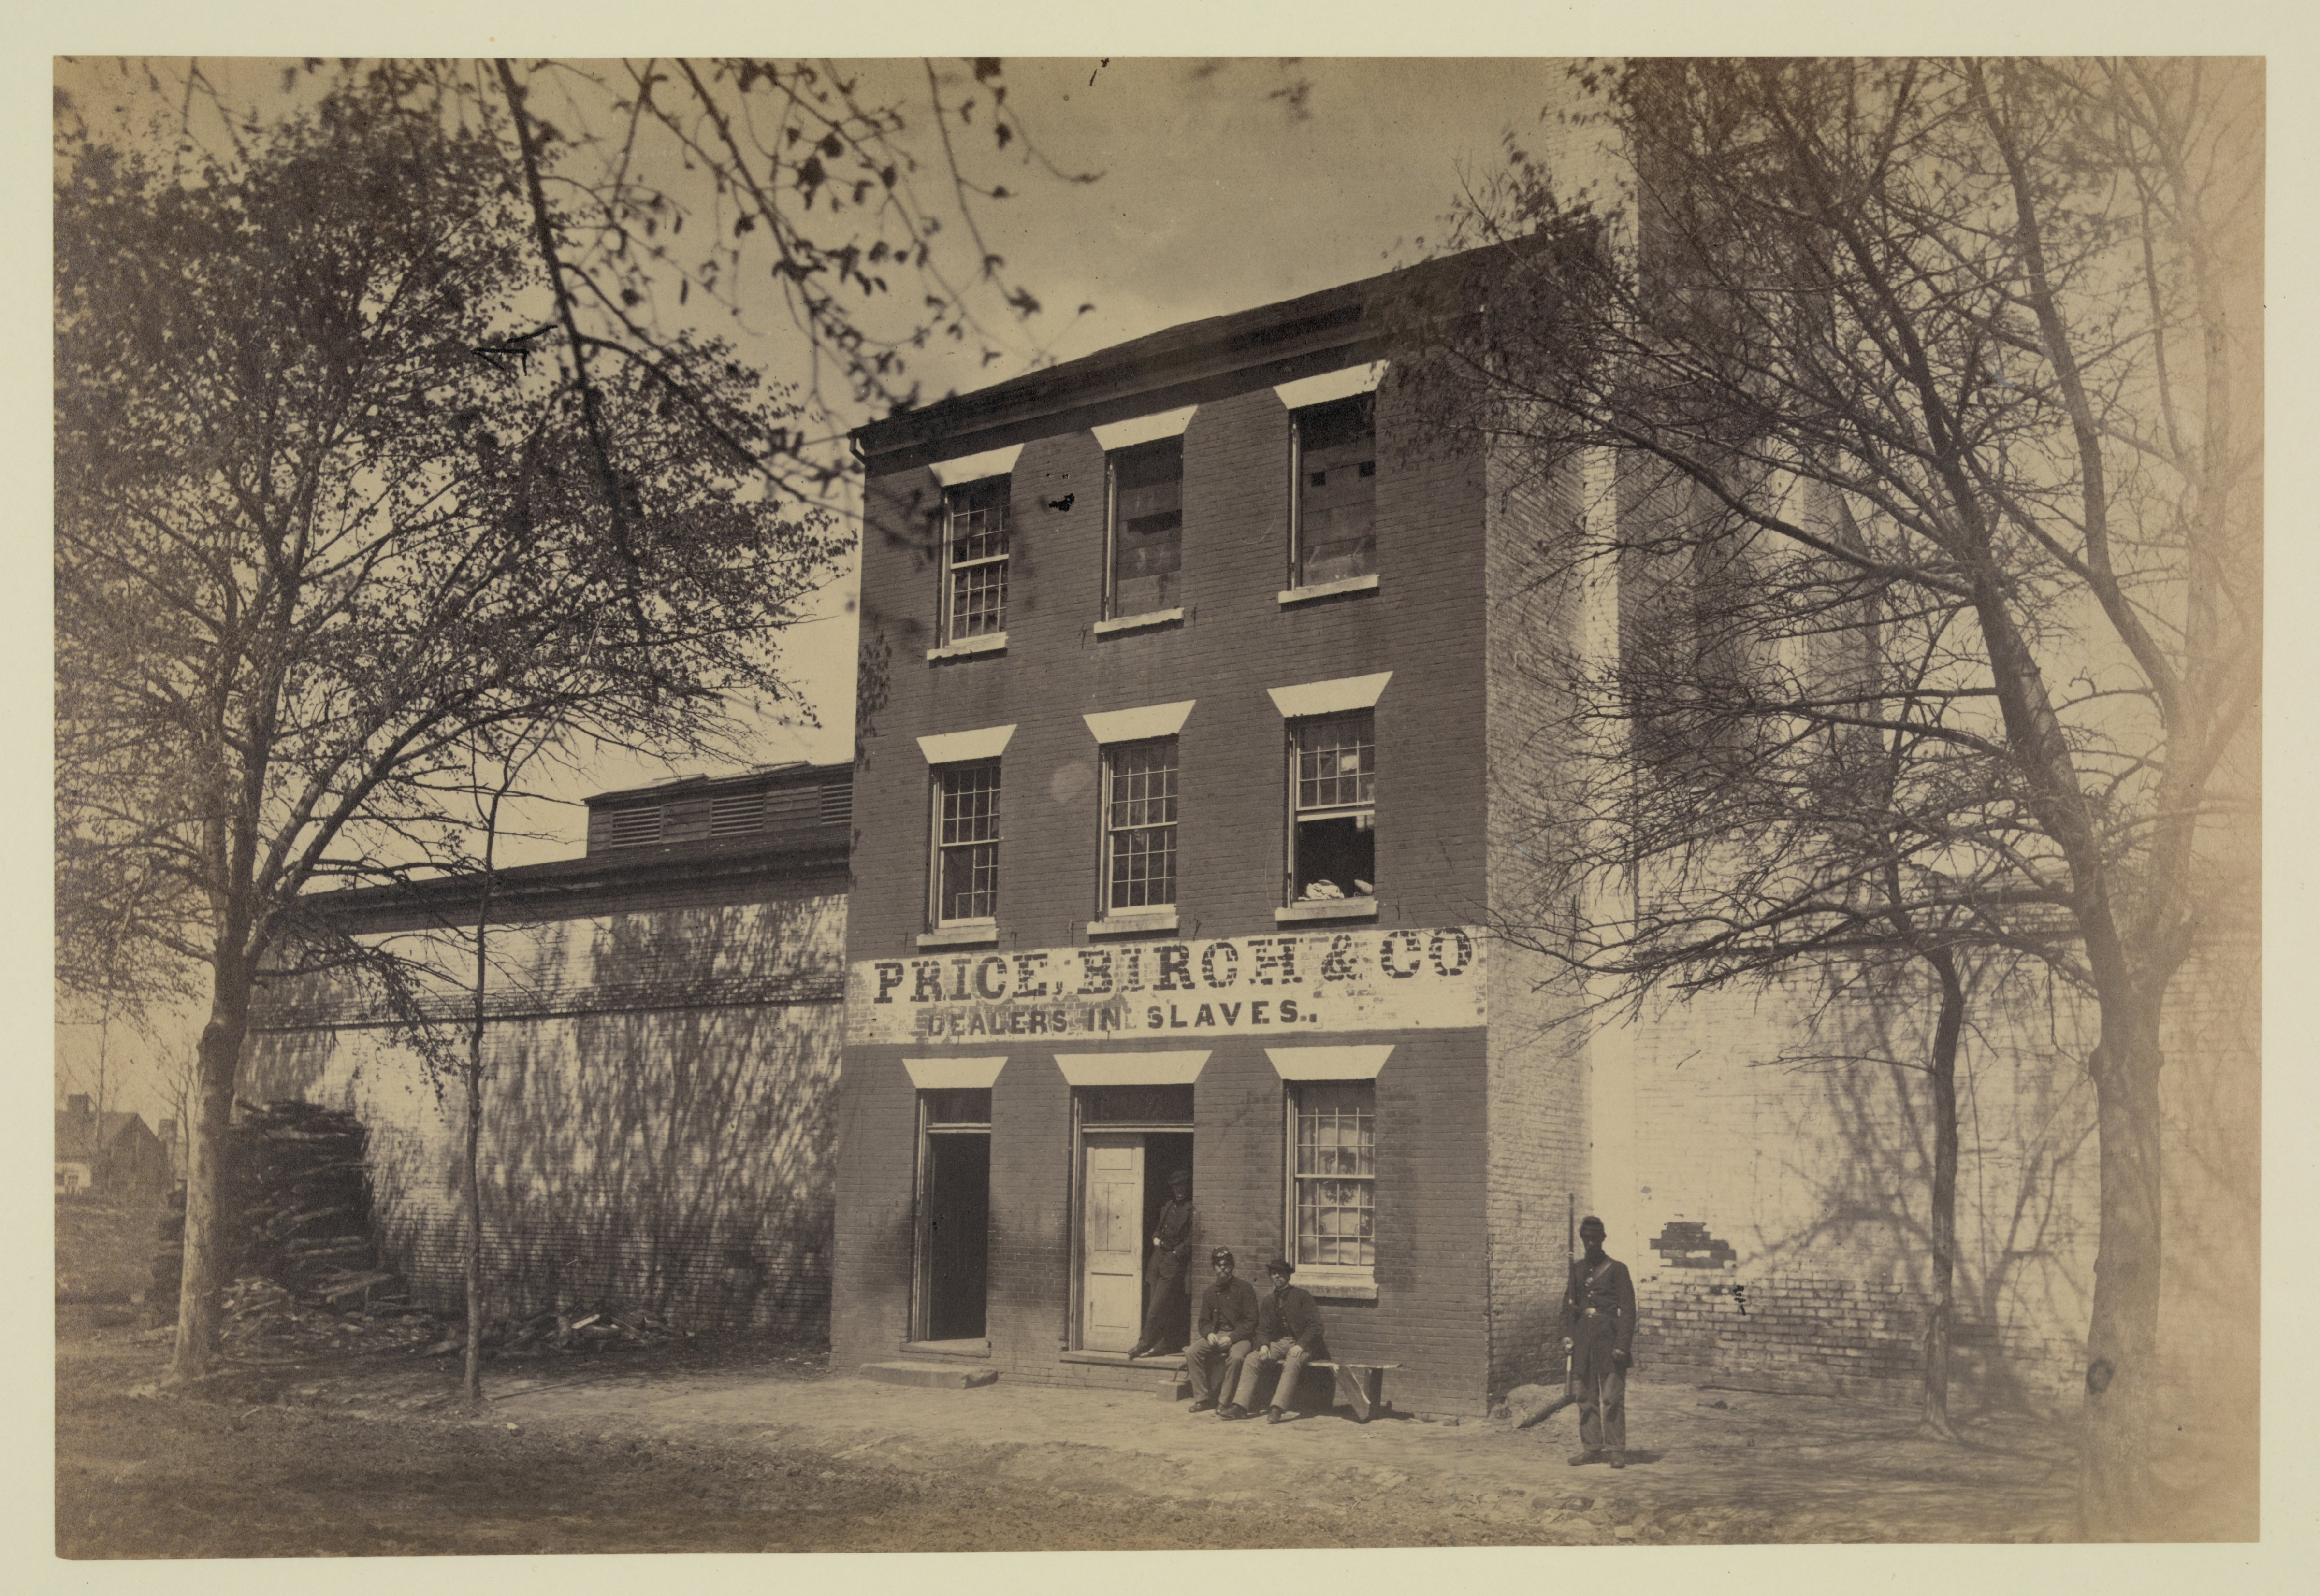 The Alexandria slave trading facility once occupied by Franklin and Armfield, as it appeared after its liberation by Union forces during the Civil War. Library of Congress Prints and Photographs Division (Library of Congress)